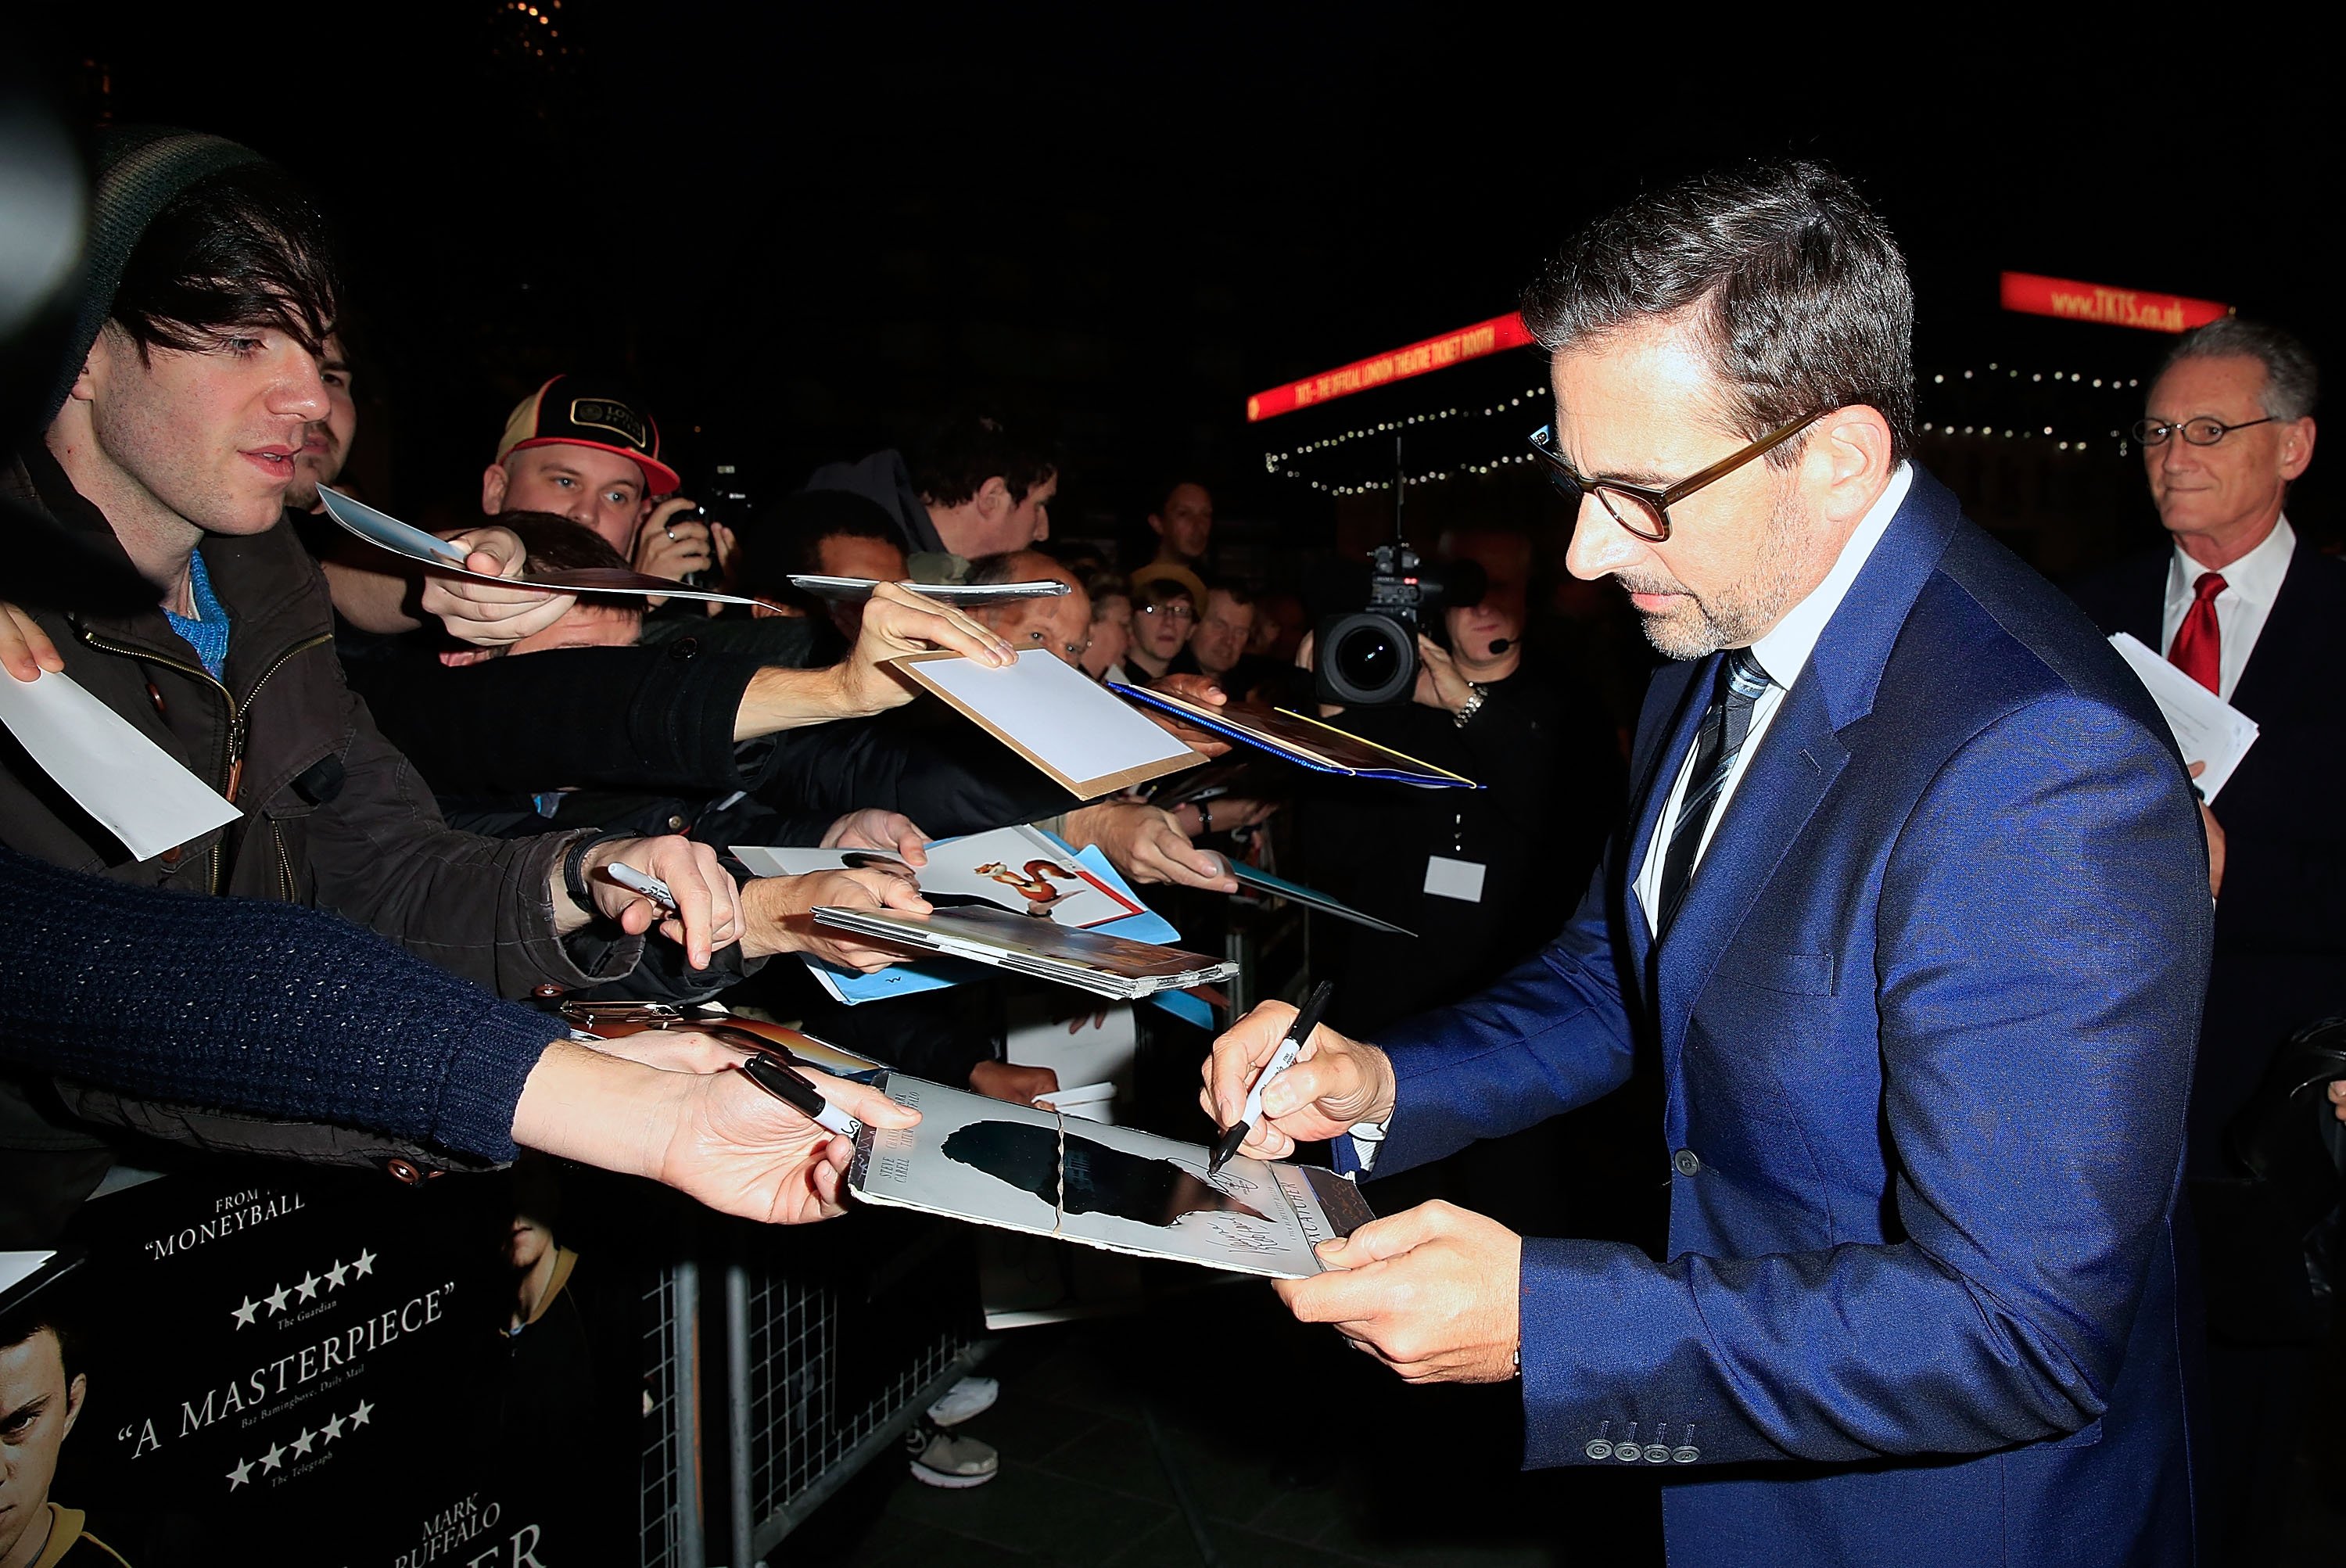 Steve Carell attends the VIP arrivals of the Amex Gala premiere for "Foxcatcher" during the 58th BFI London Film Festival on October 16, 2014 in London, England | Source: Getty Images